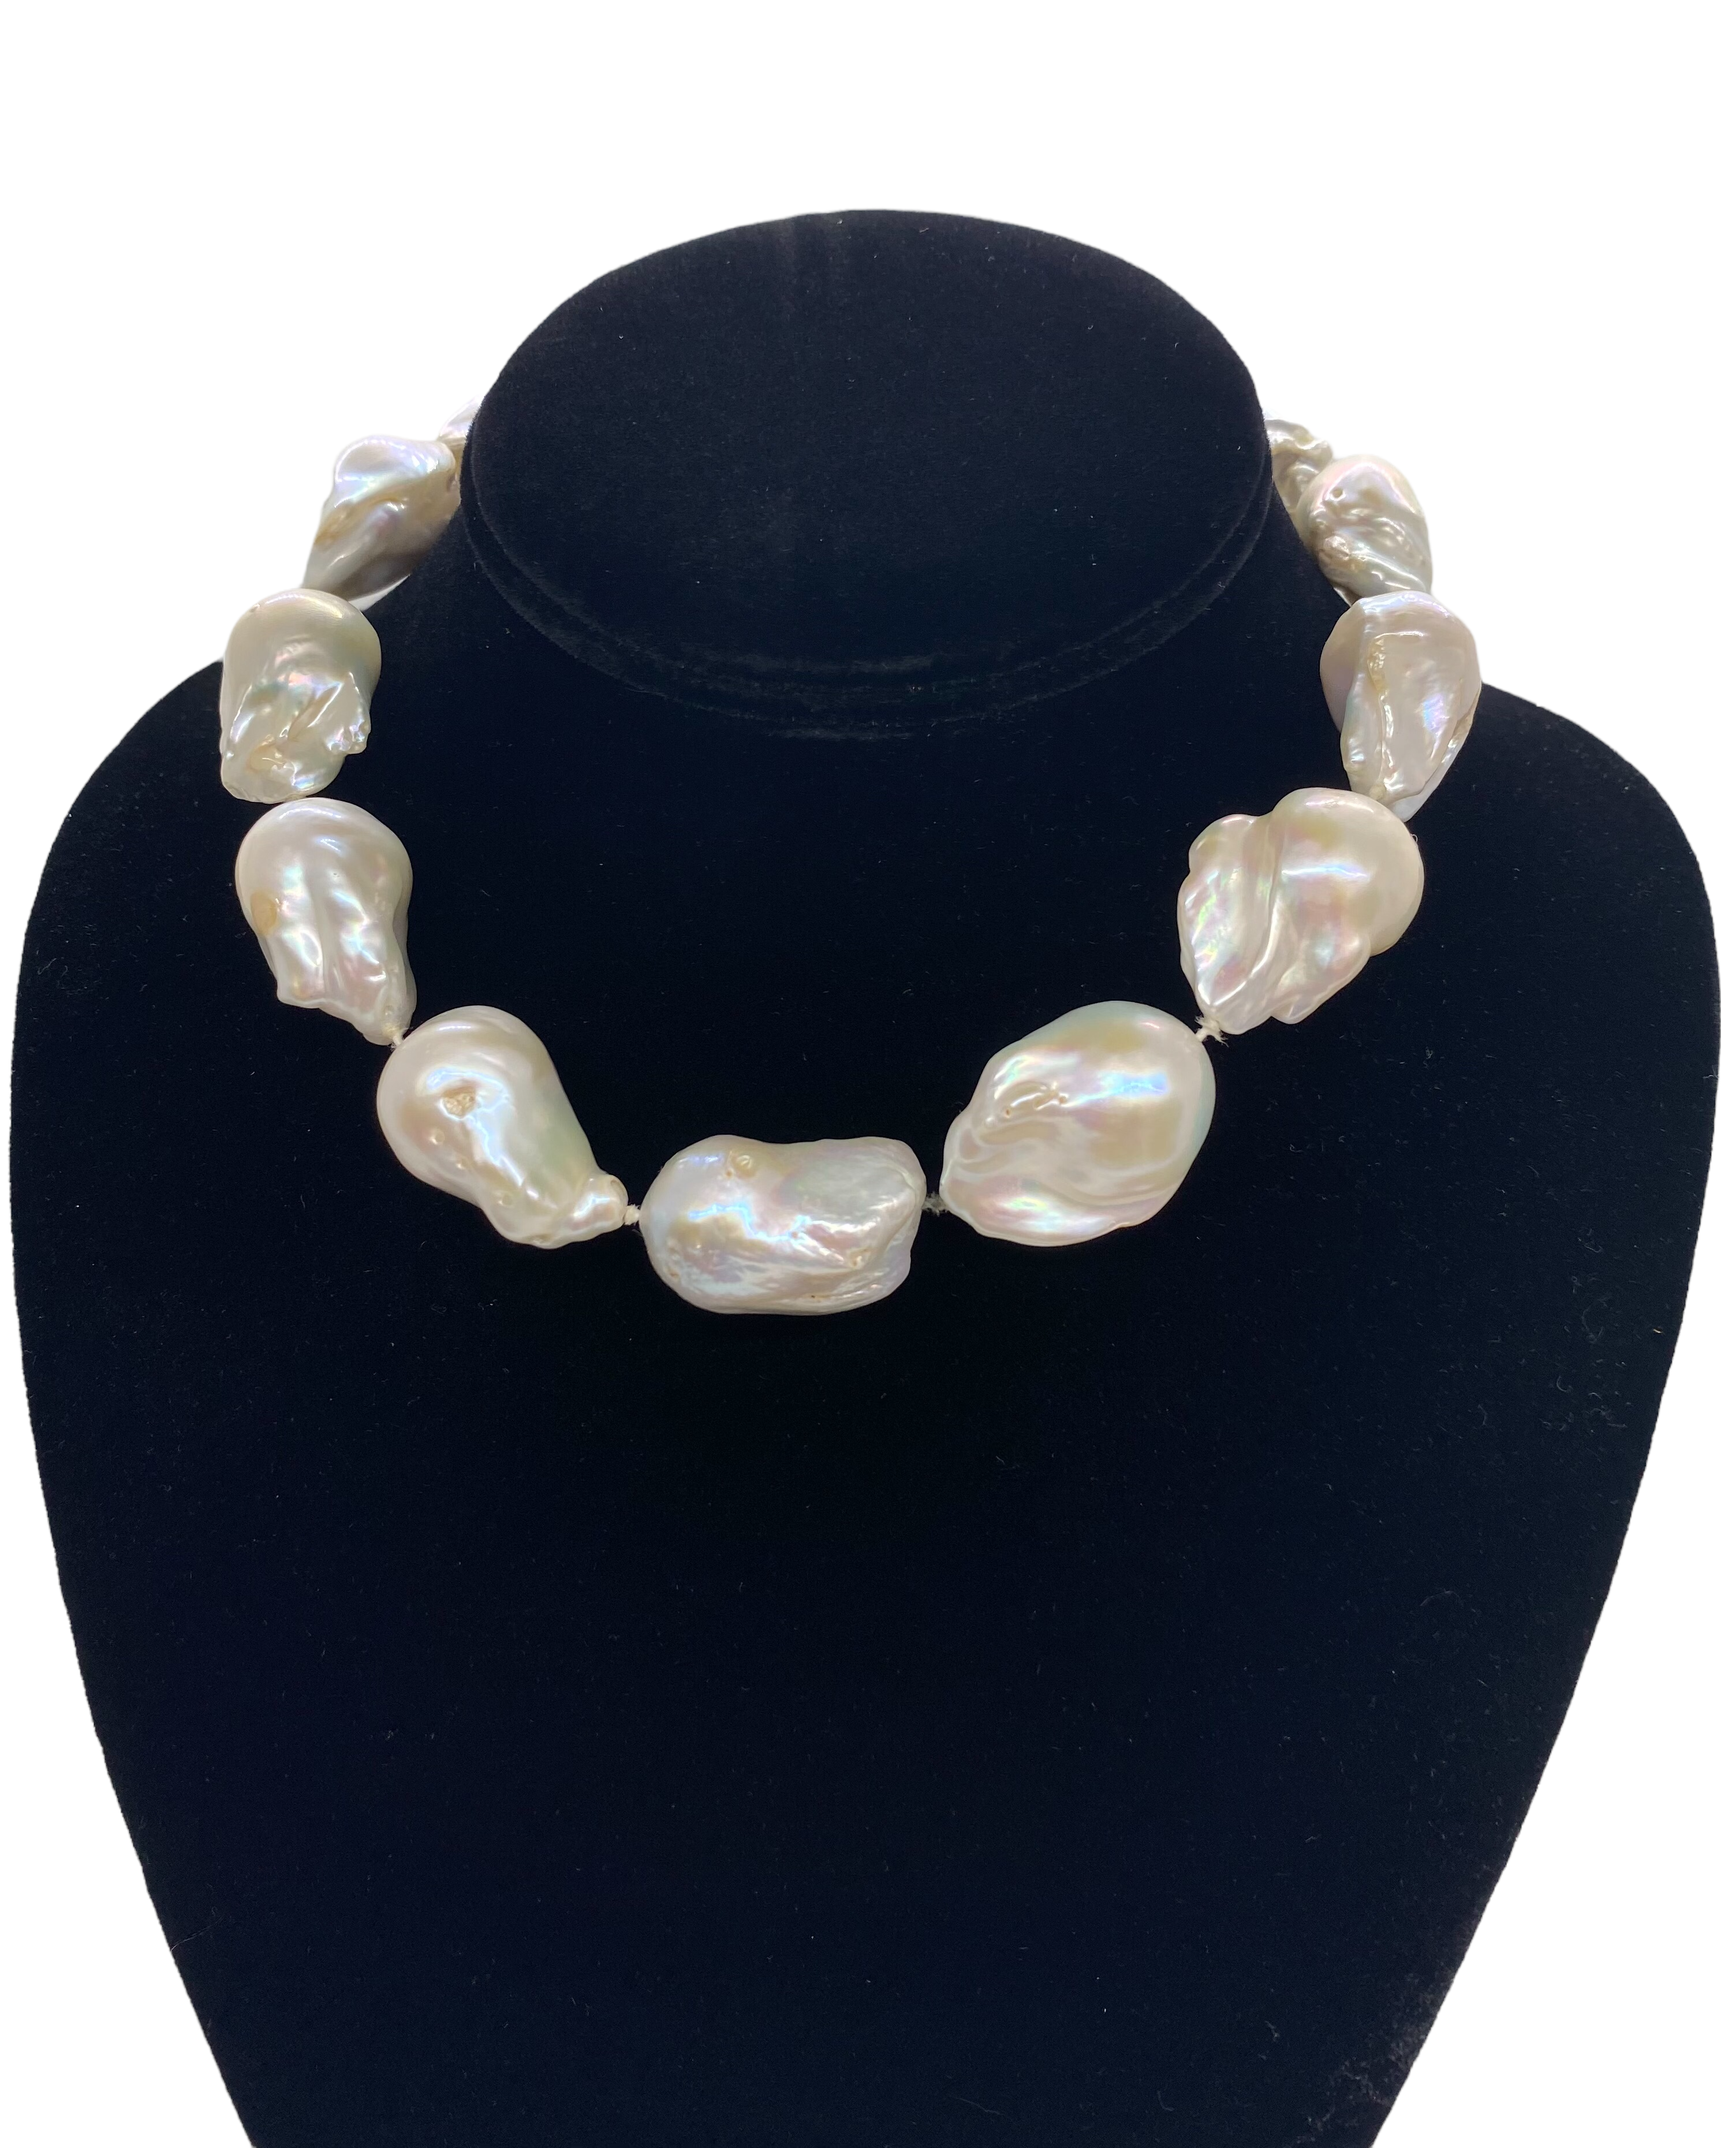 Exquisite Vintage Haskell Baroque Pearl Necklace With Sparkle - Ruby Lane